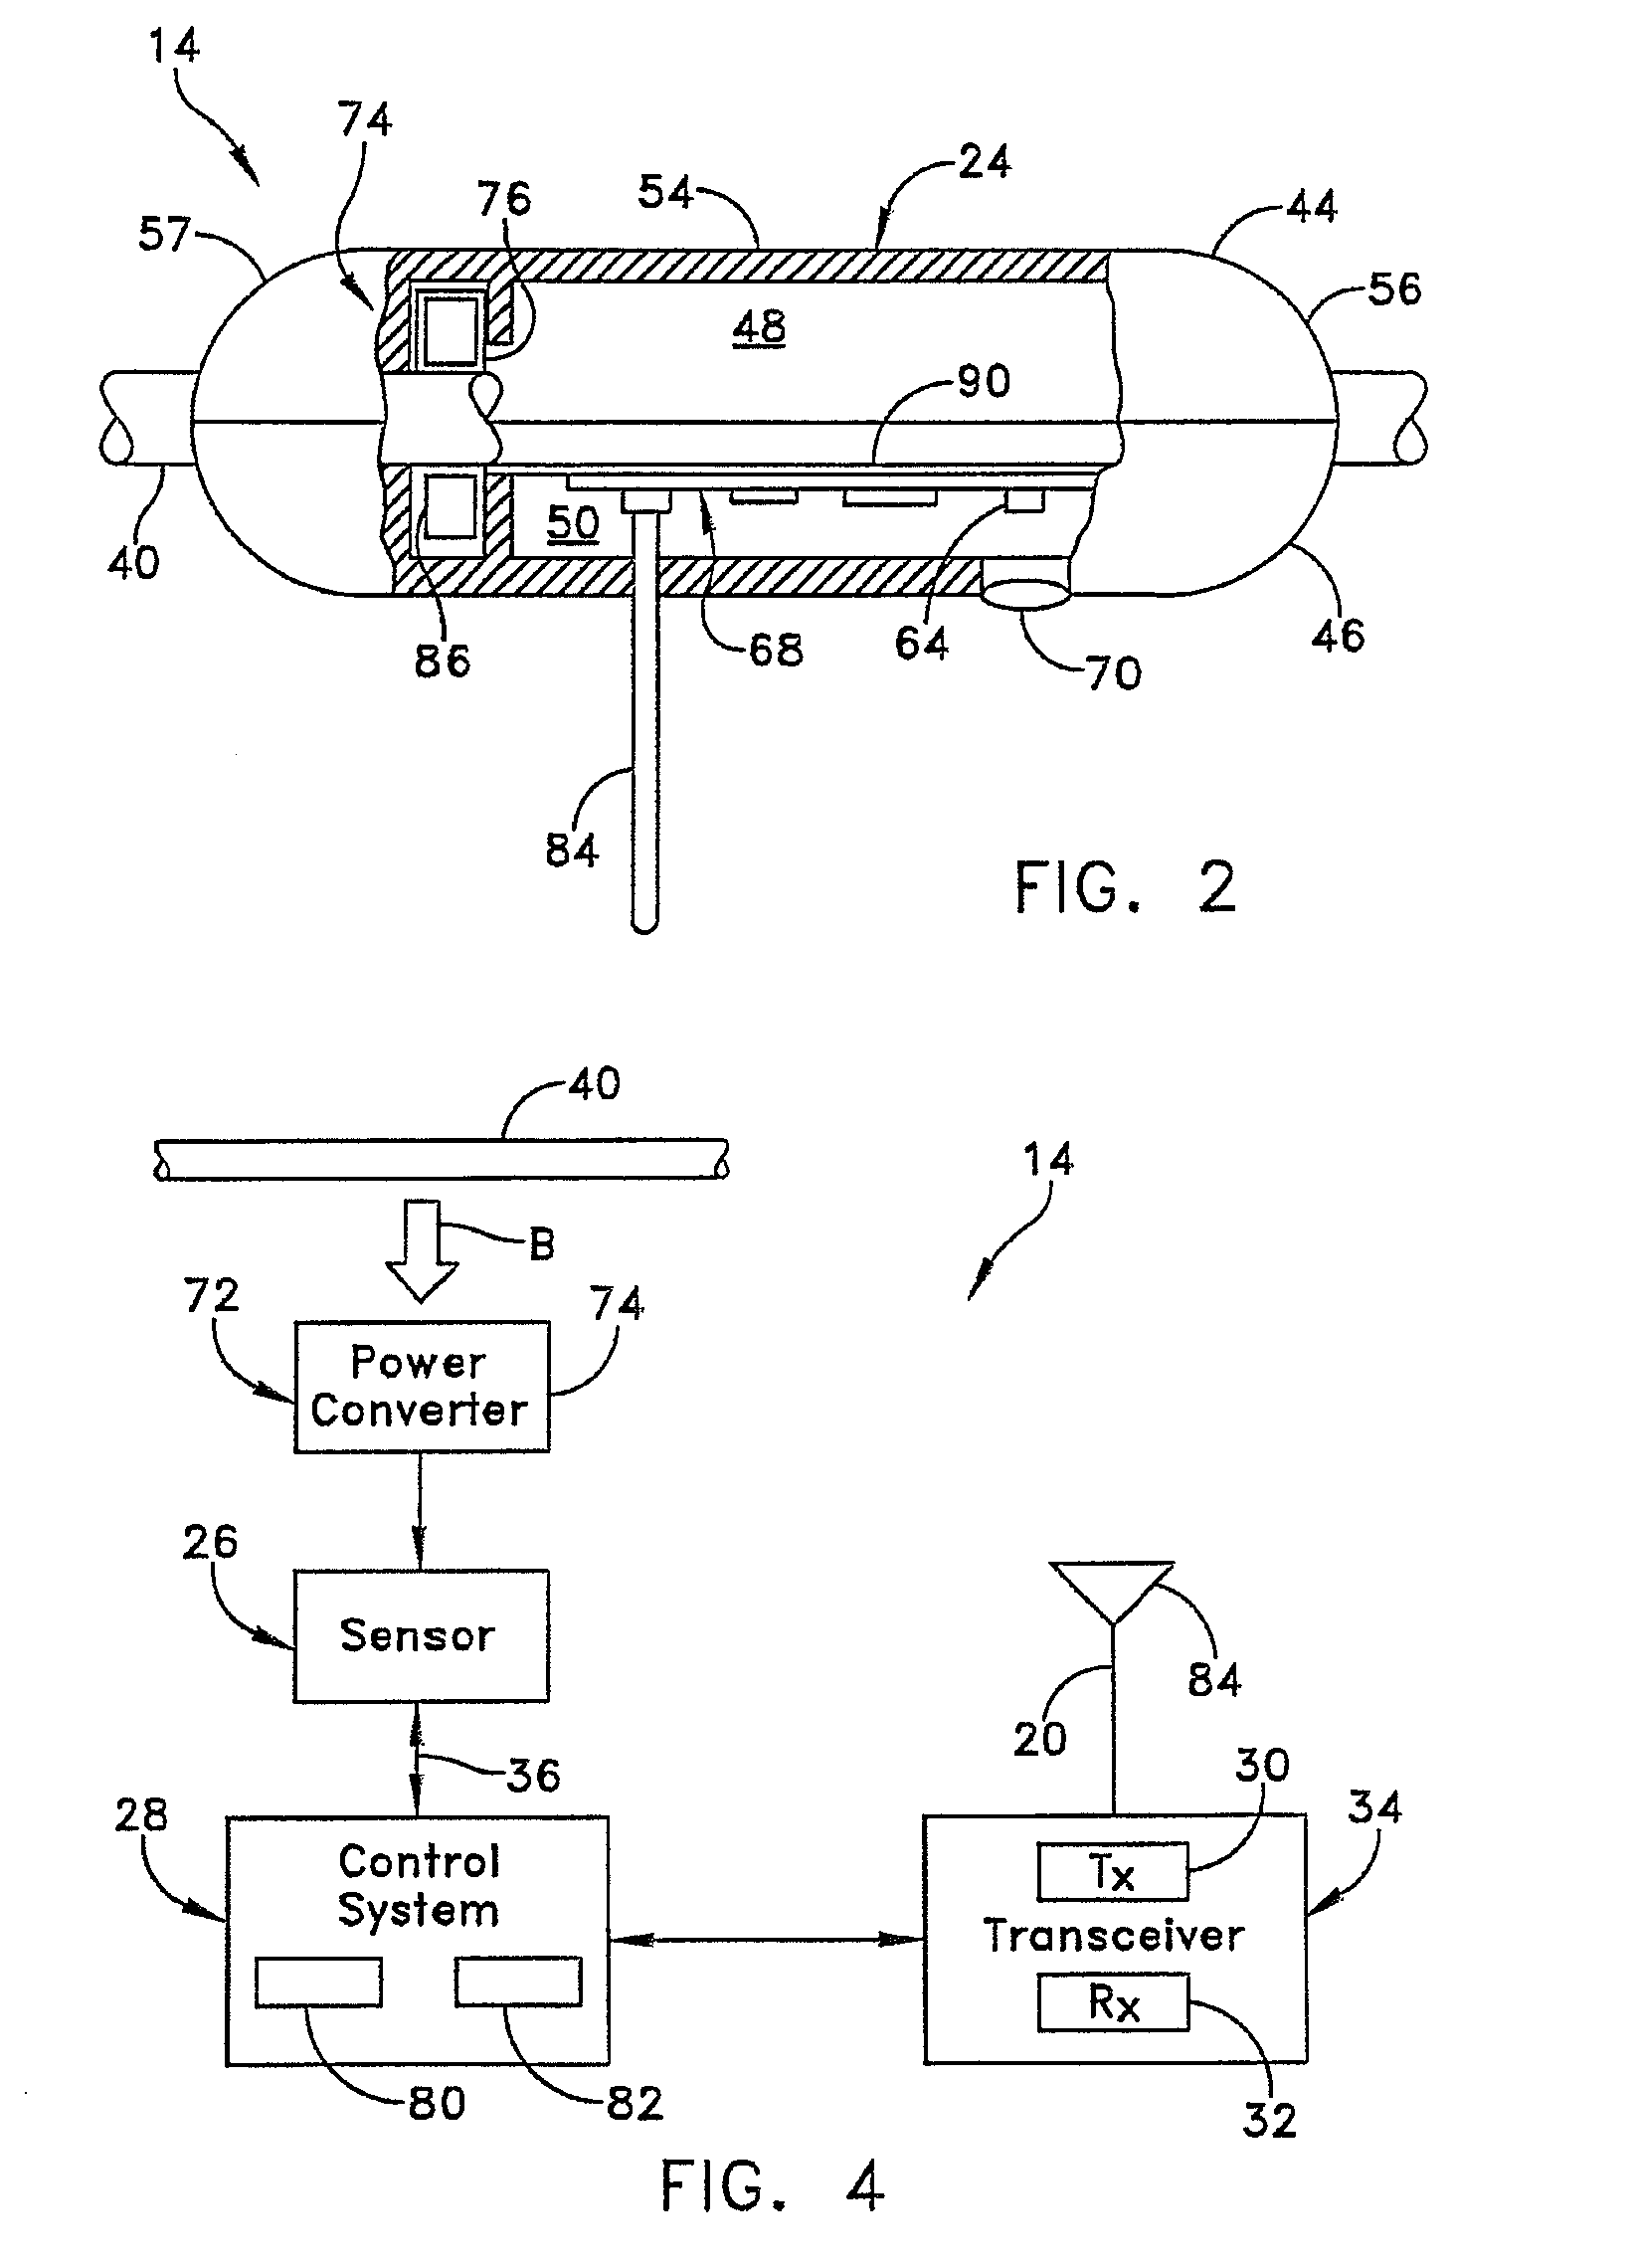 Methods, apparatus, and systems for monitoring transmission systems